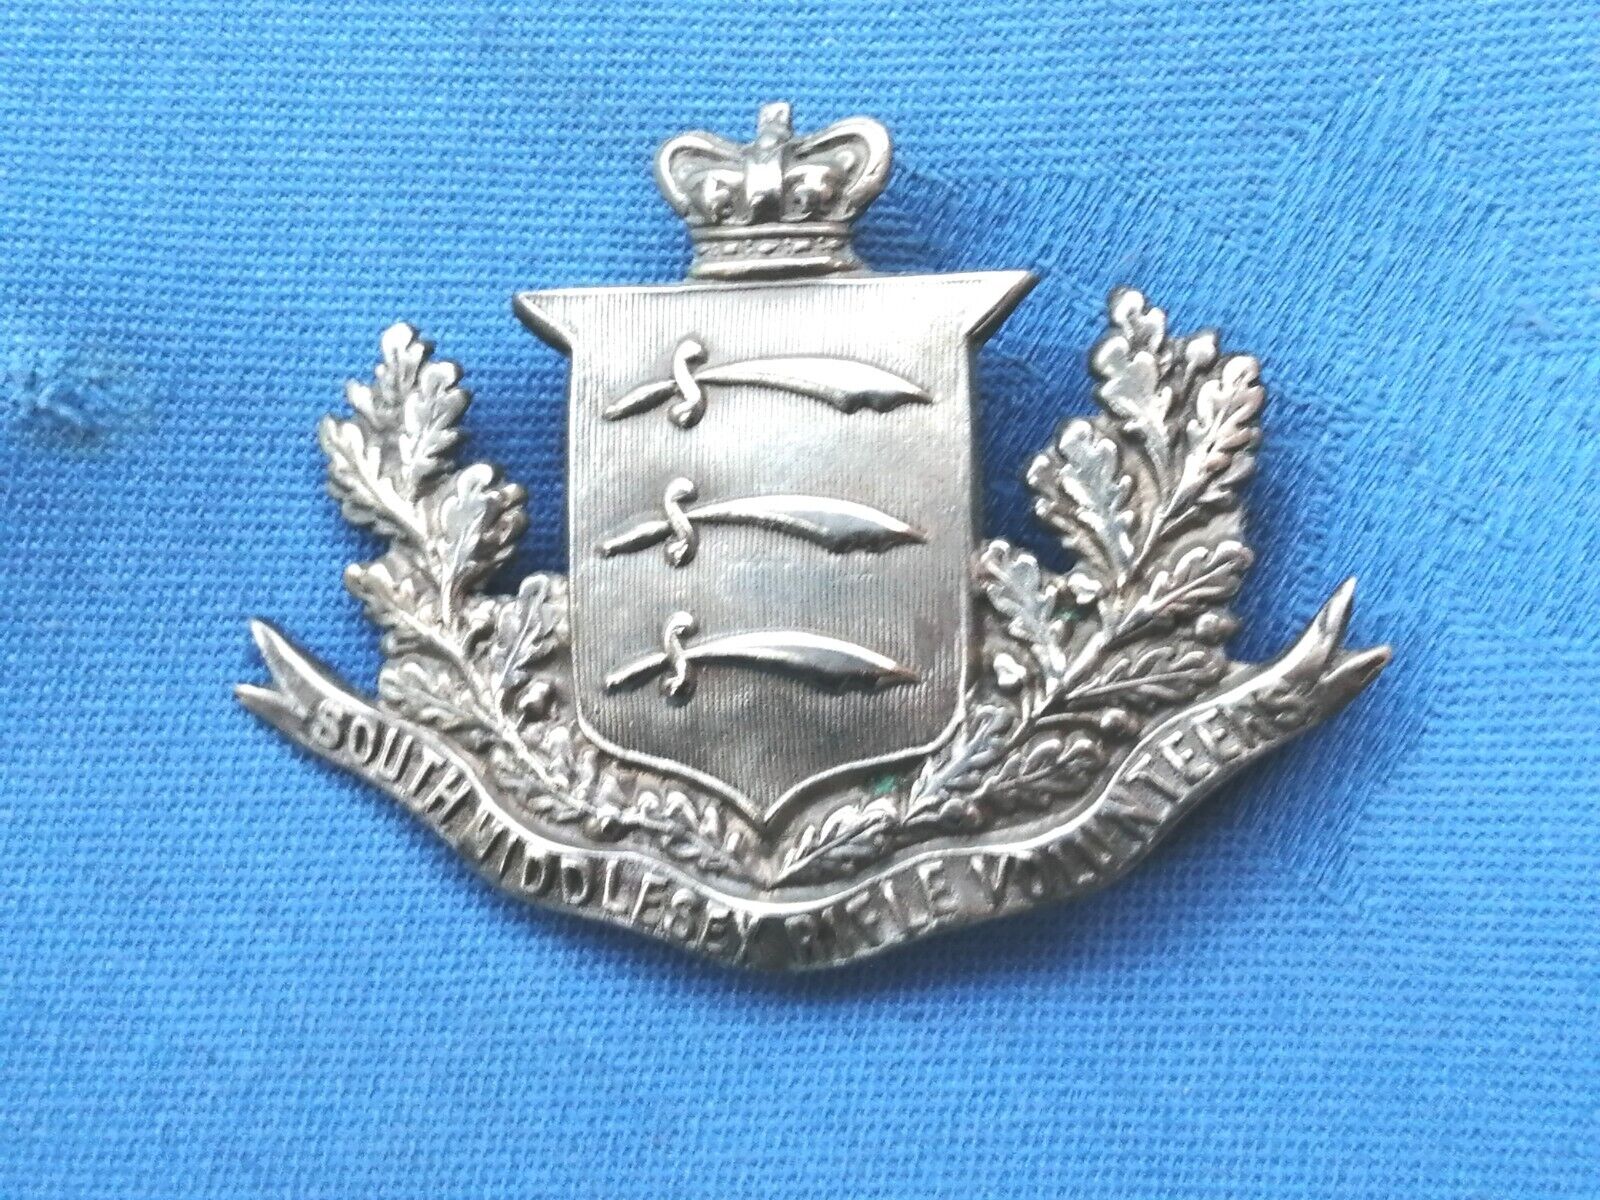 The South Middlesex Rifle Volunteer cap badge.